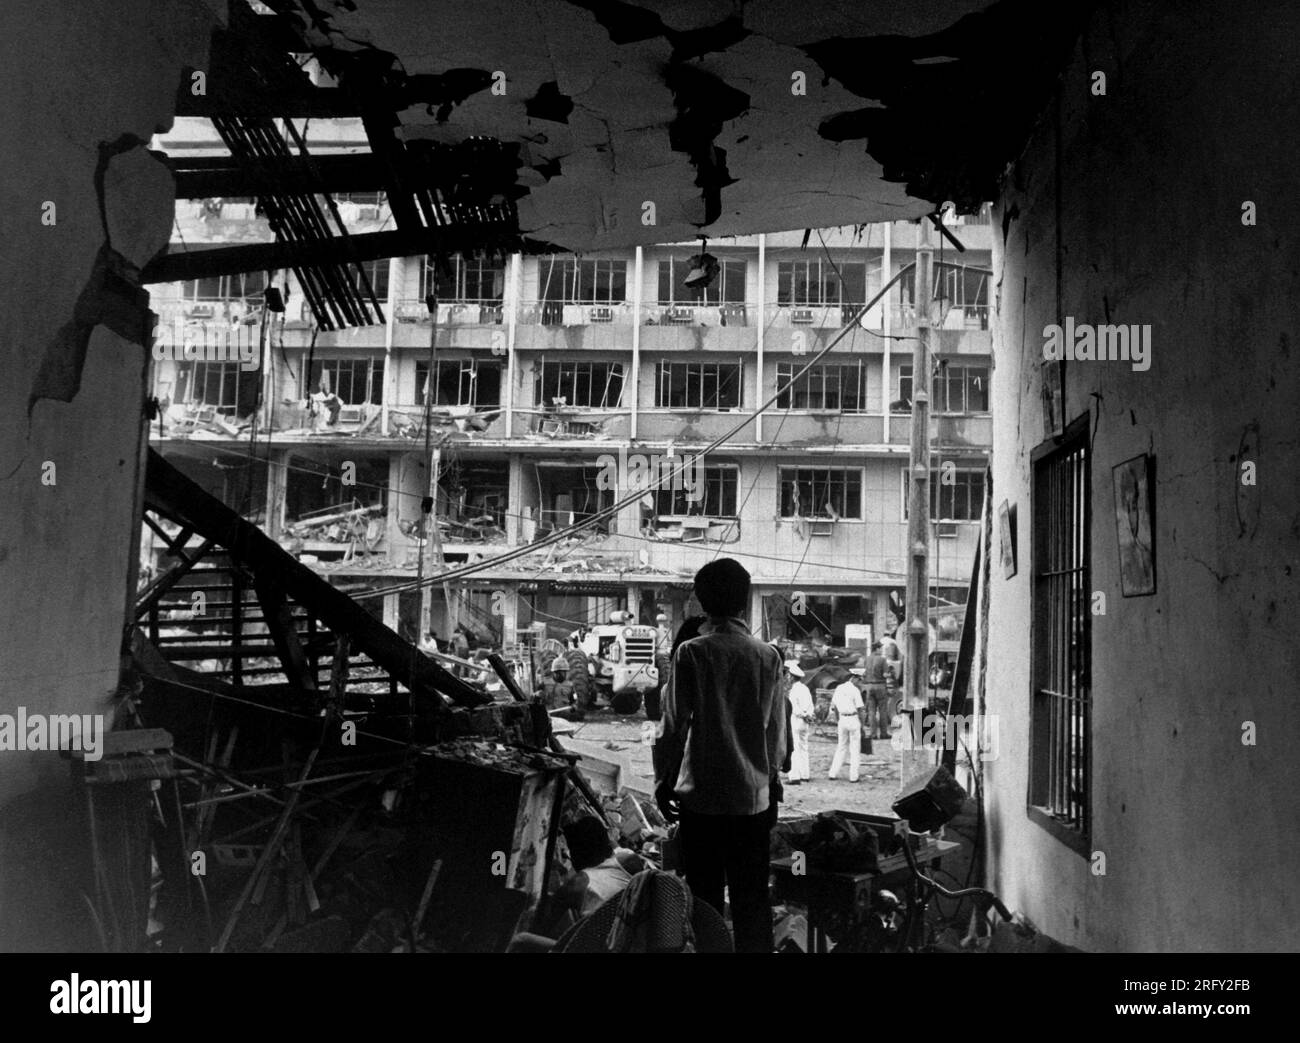 SAIGON, VIETNAM - 01 April 1966 - Four Vietnamese and three Americans were killed and dozens of Vietnamese buildings were heavily damaged during a Vie Stock Photo